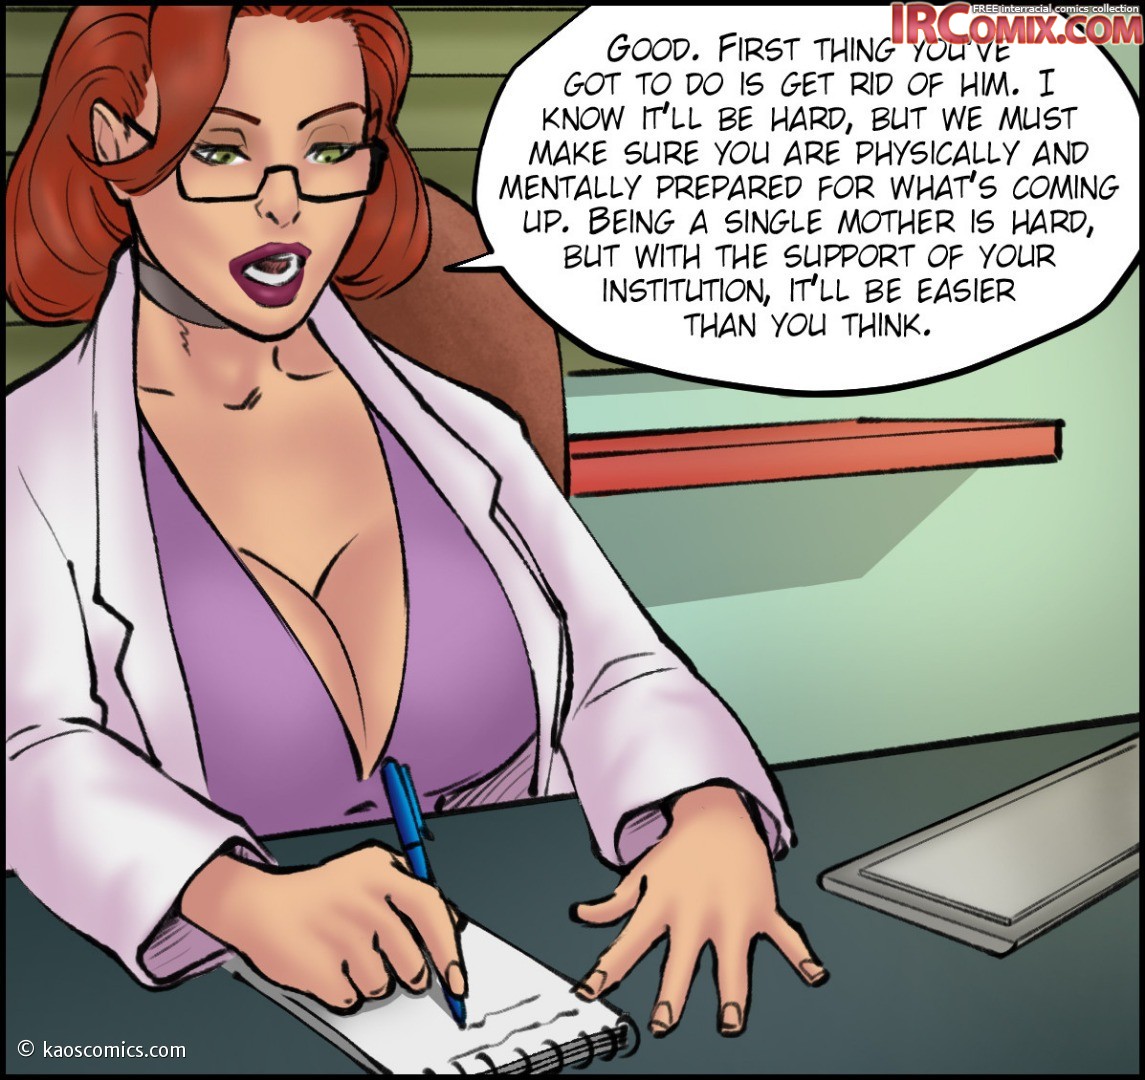 Story driven BBC porn comic book featuring a really hot redhead